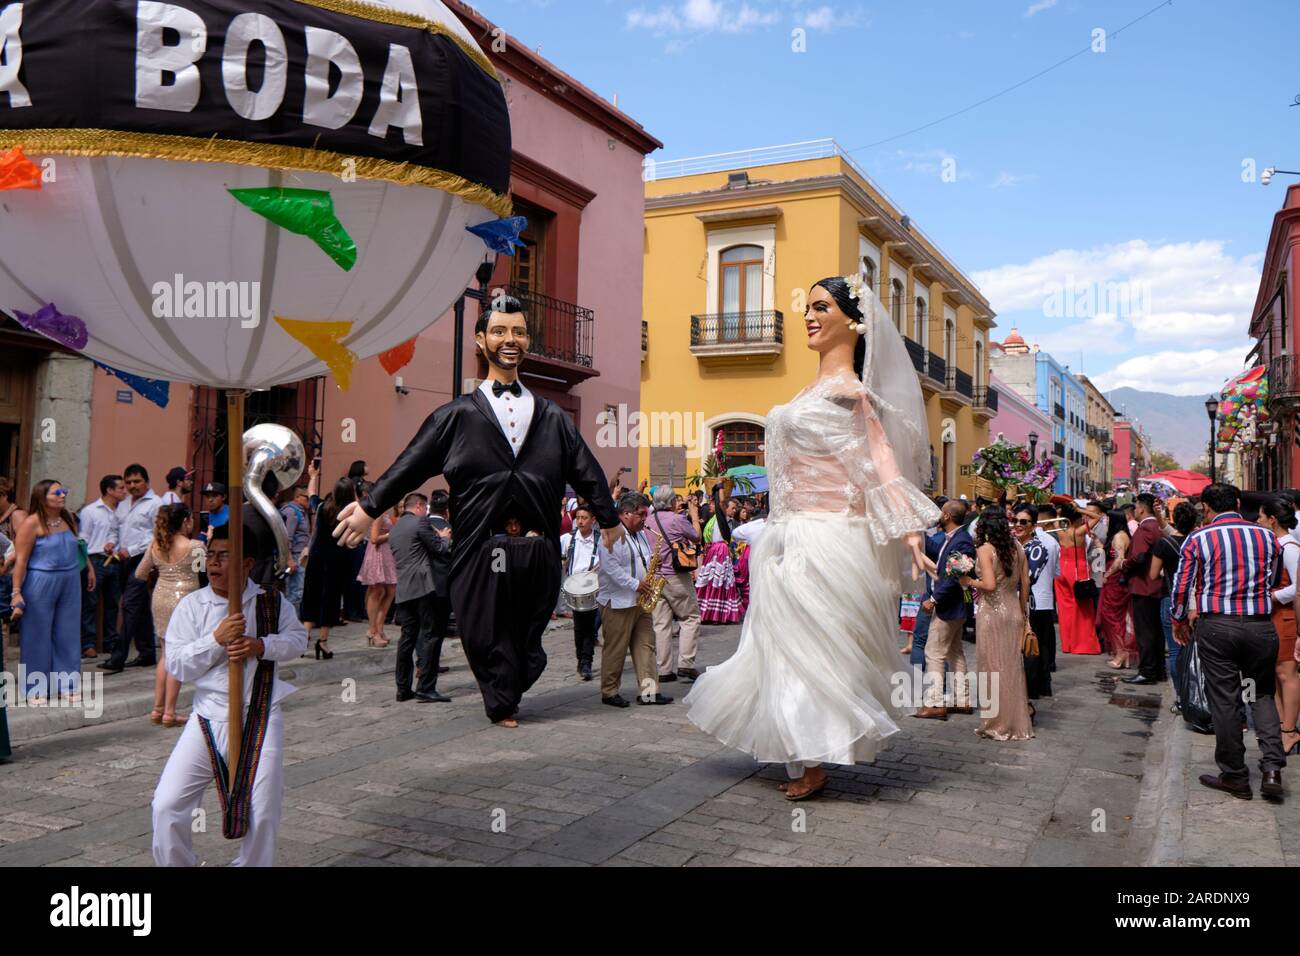 Giant puppet of the Bride and groom with large ball Part of Traditional wedding parade (Calenda de Bodas) on the streets of Oaxaca. Stock Photo